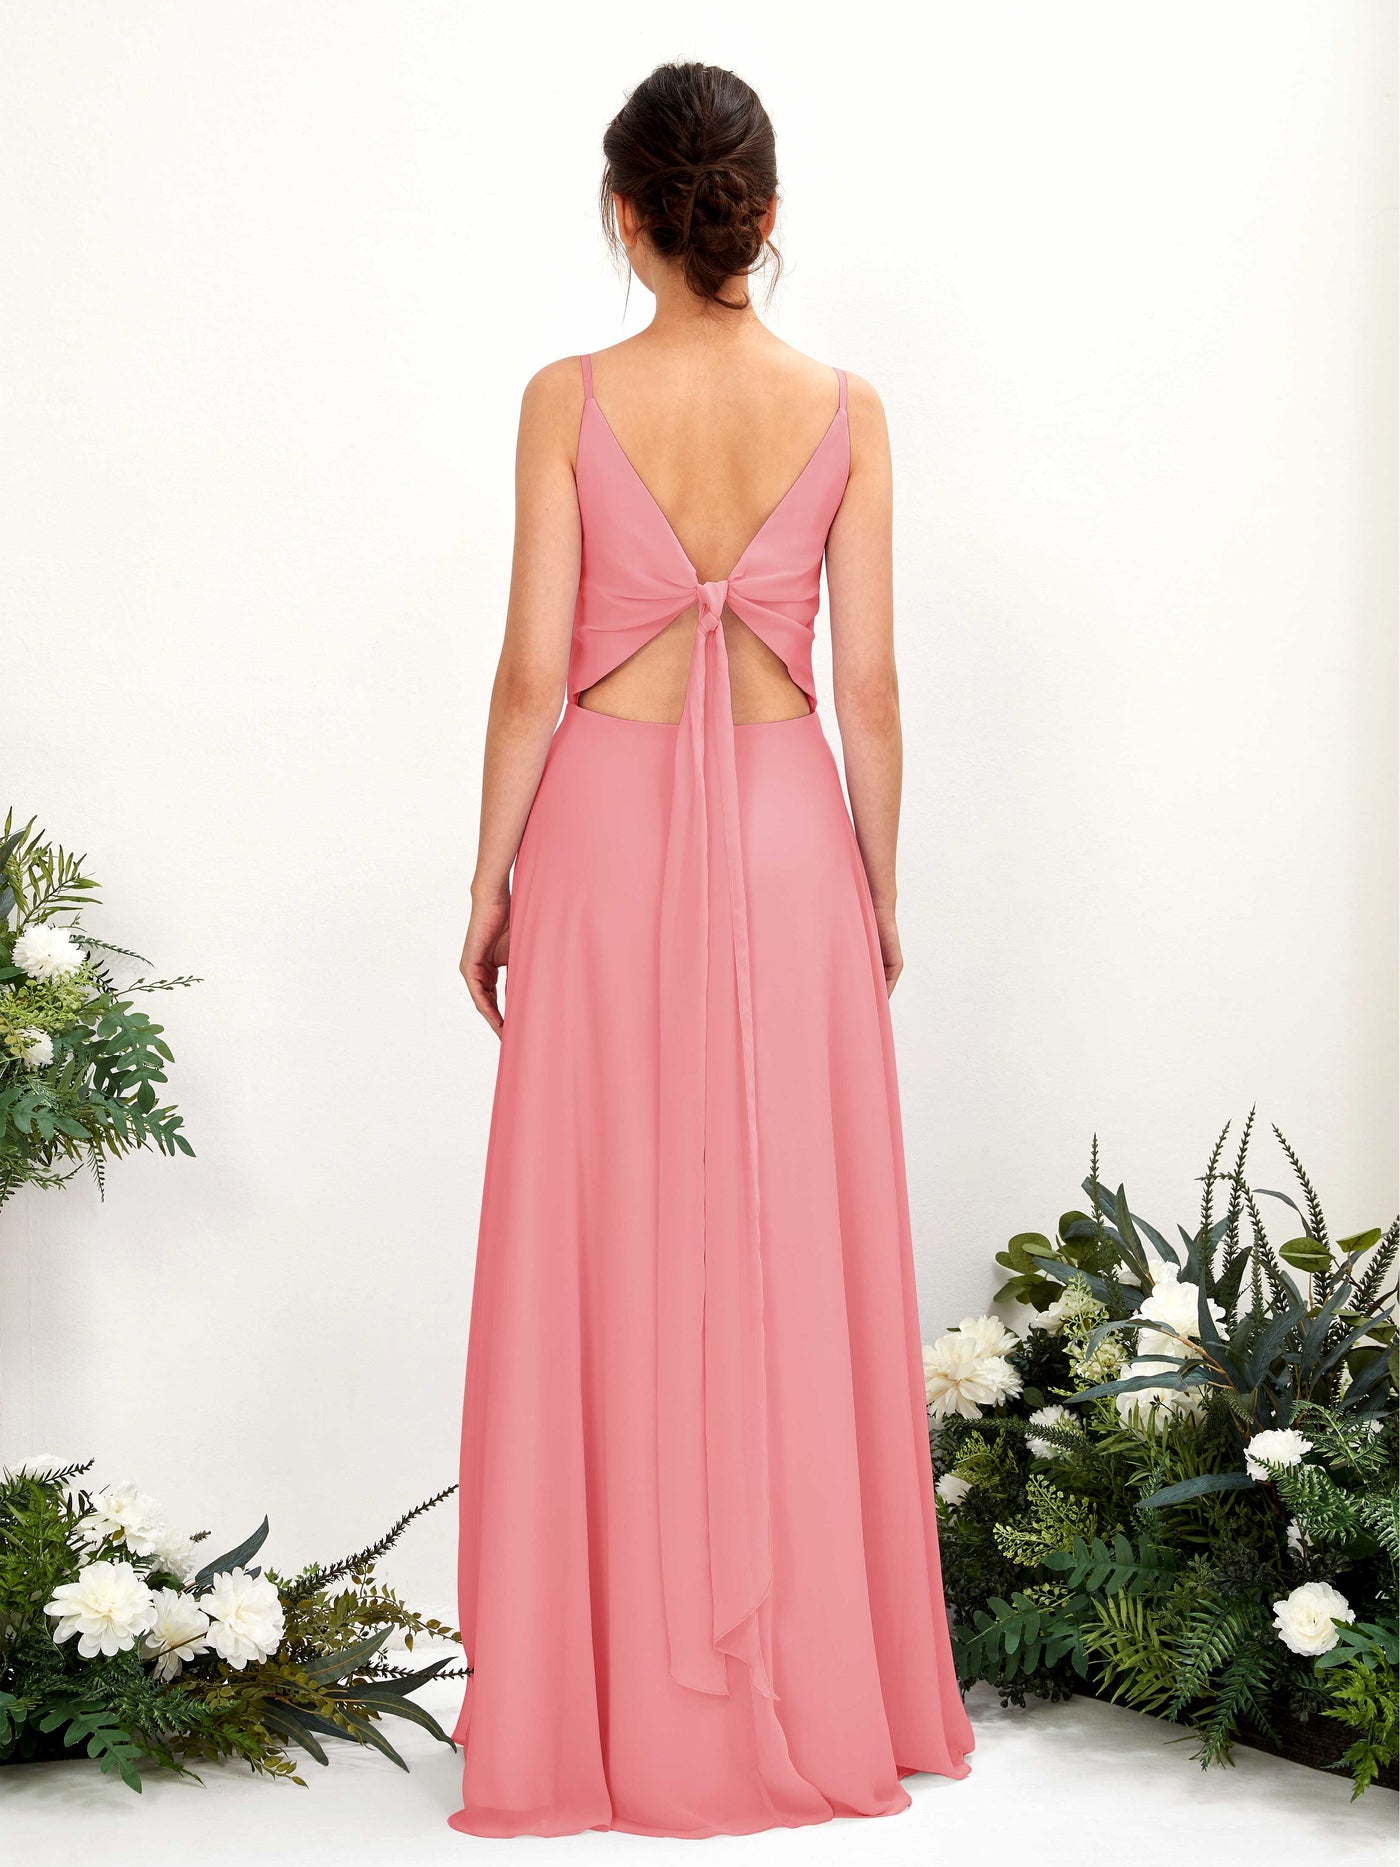 Coral Pink Bridesmaid Dresses Bridesmaid Dress A-line Chiffon Spaghetti-straps Full Length Sleeveless Wedding Party Dress (81220630)#color_coral-pink